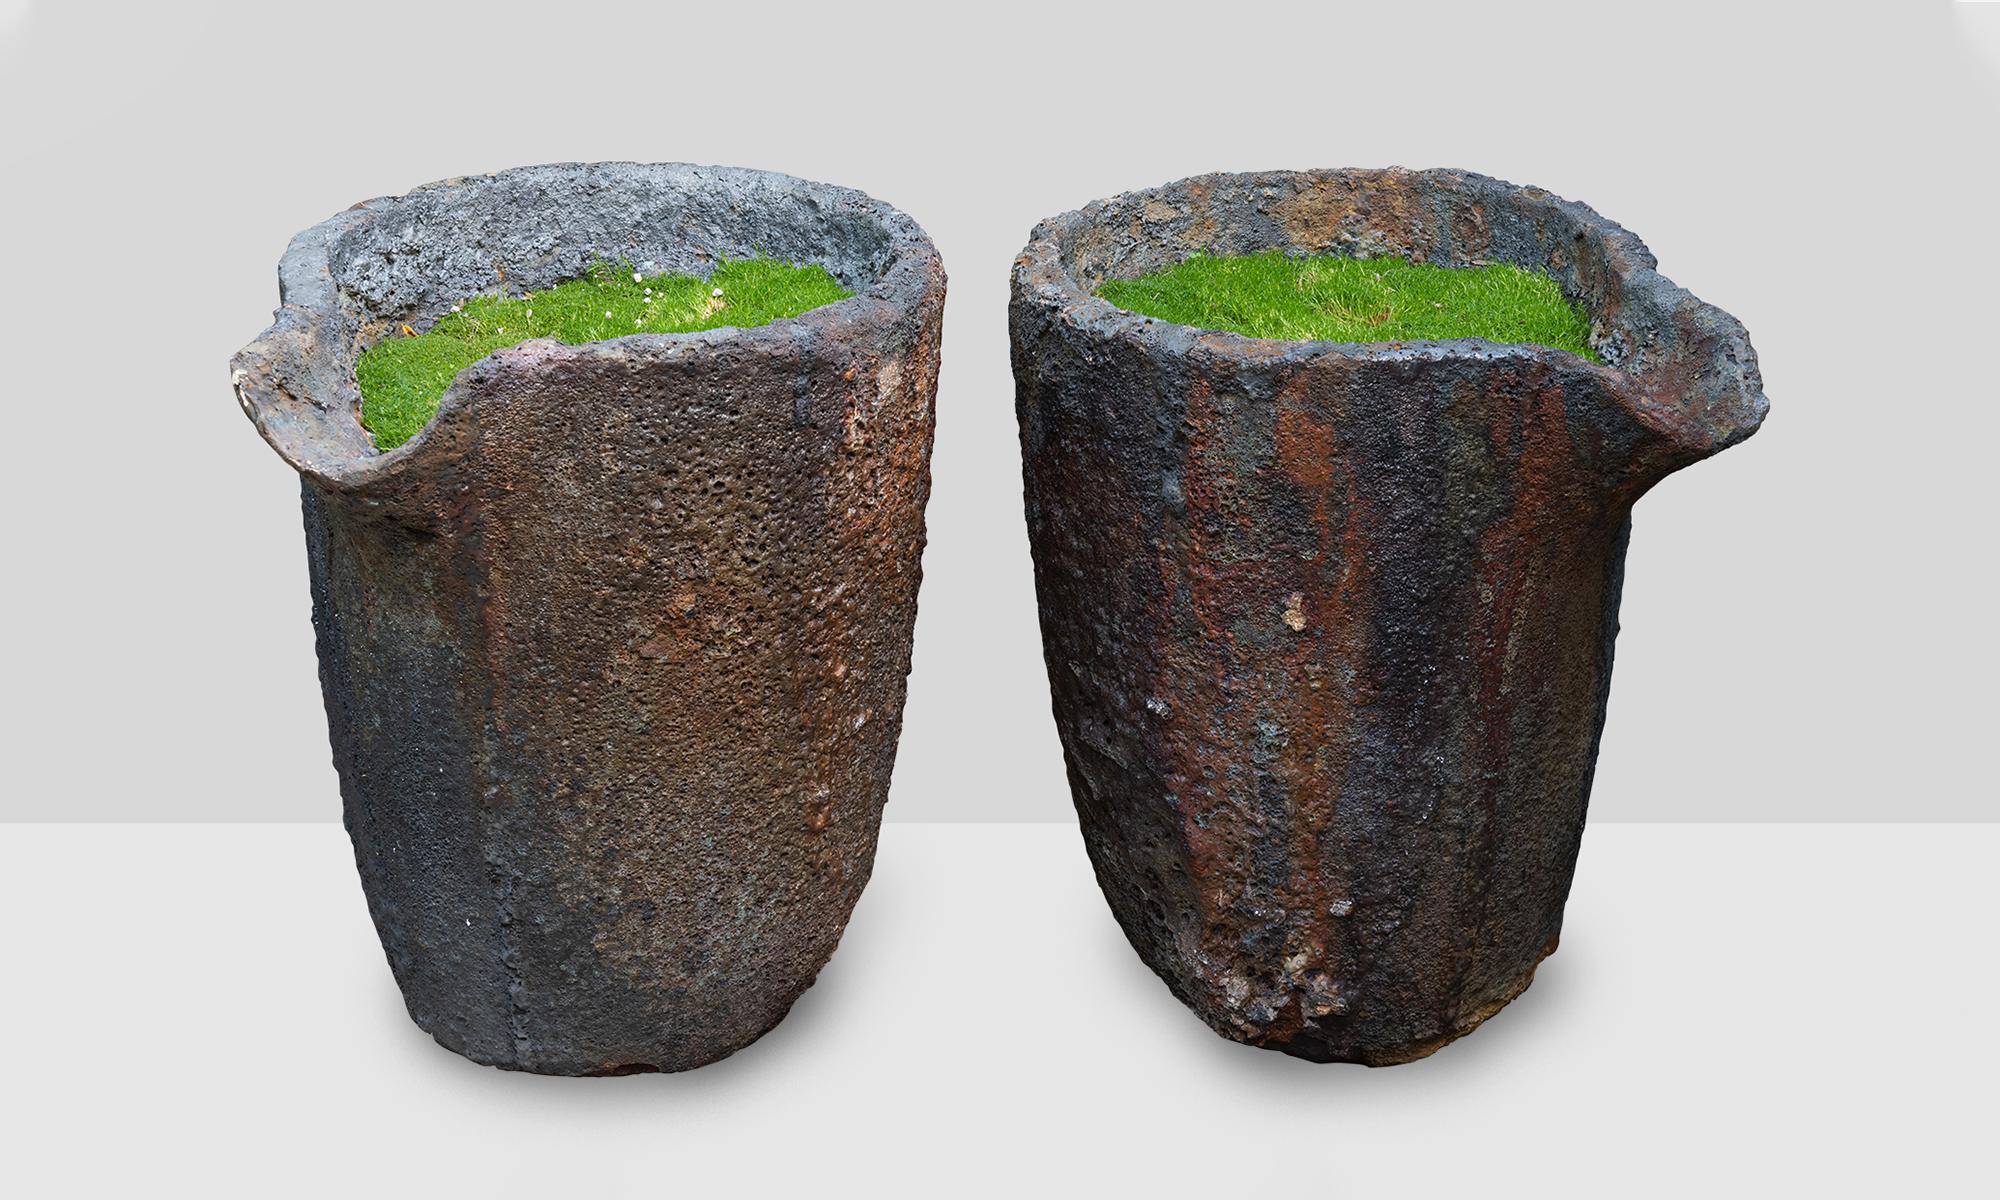 Foundry Crucible Planter, France, 20th century.

The perfect garden vessel, originally used for pouring liquid metal.